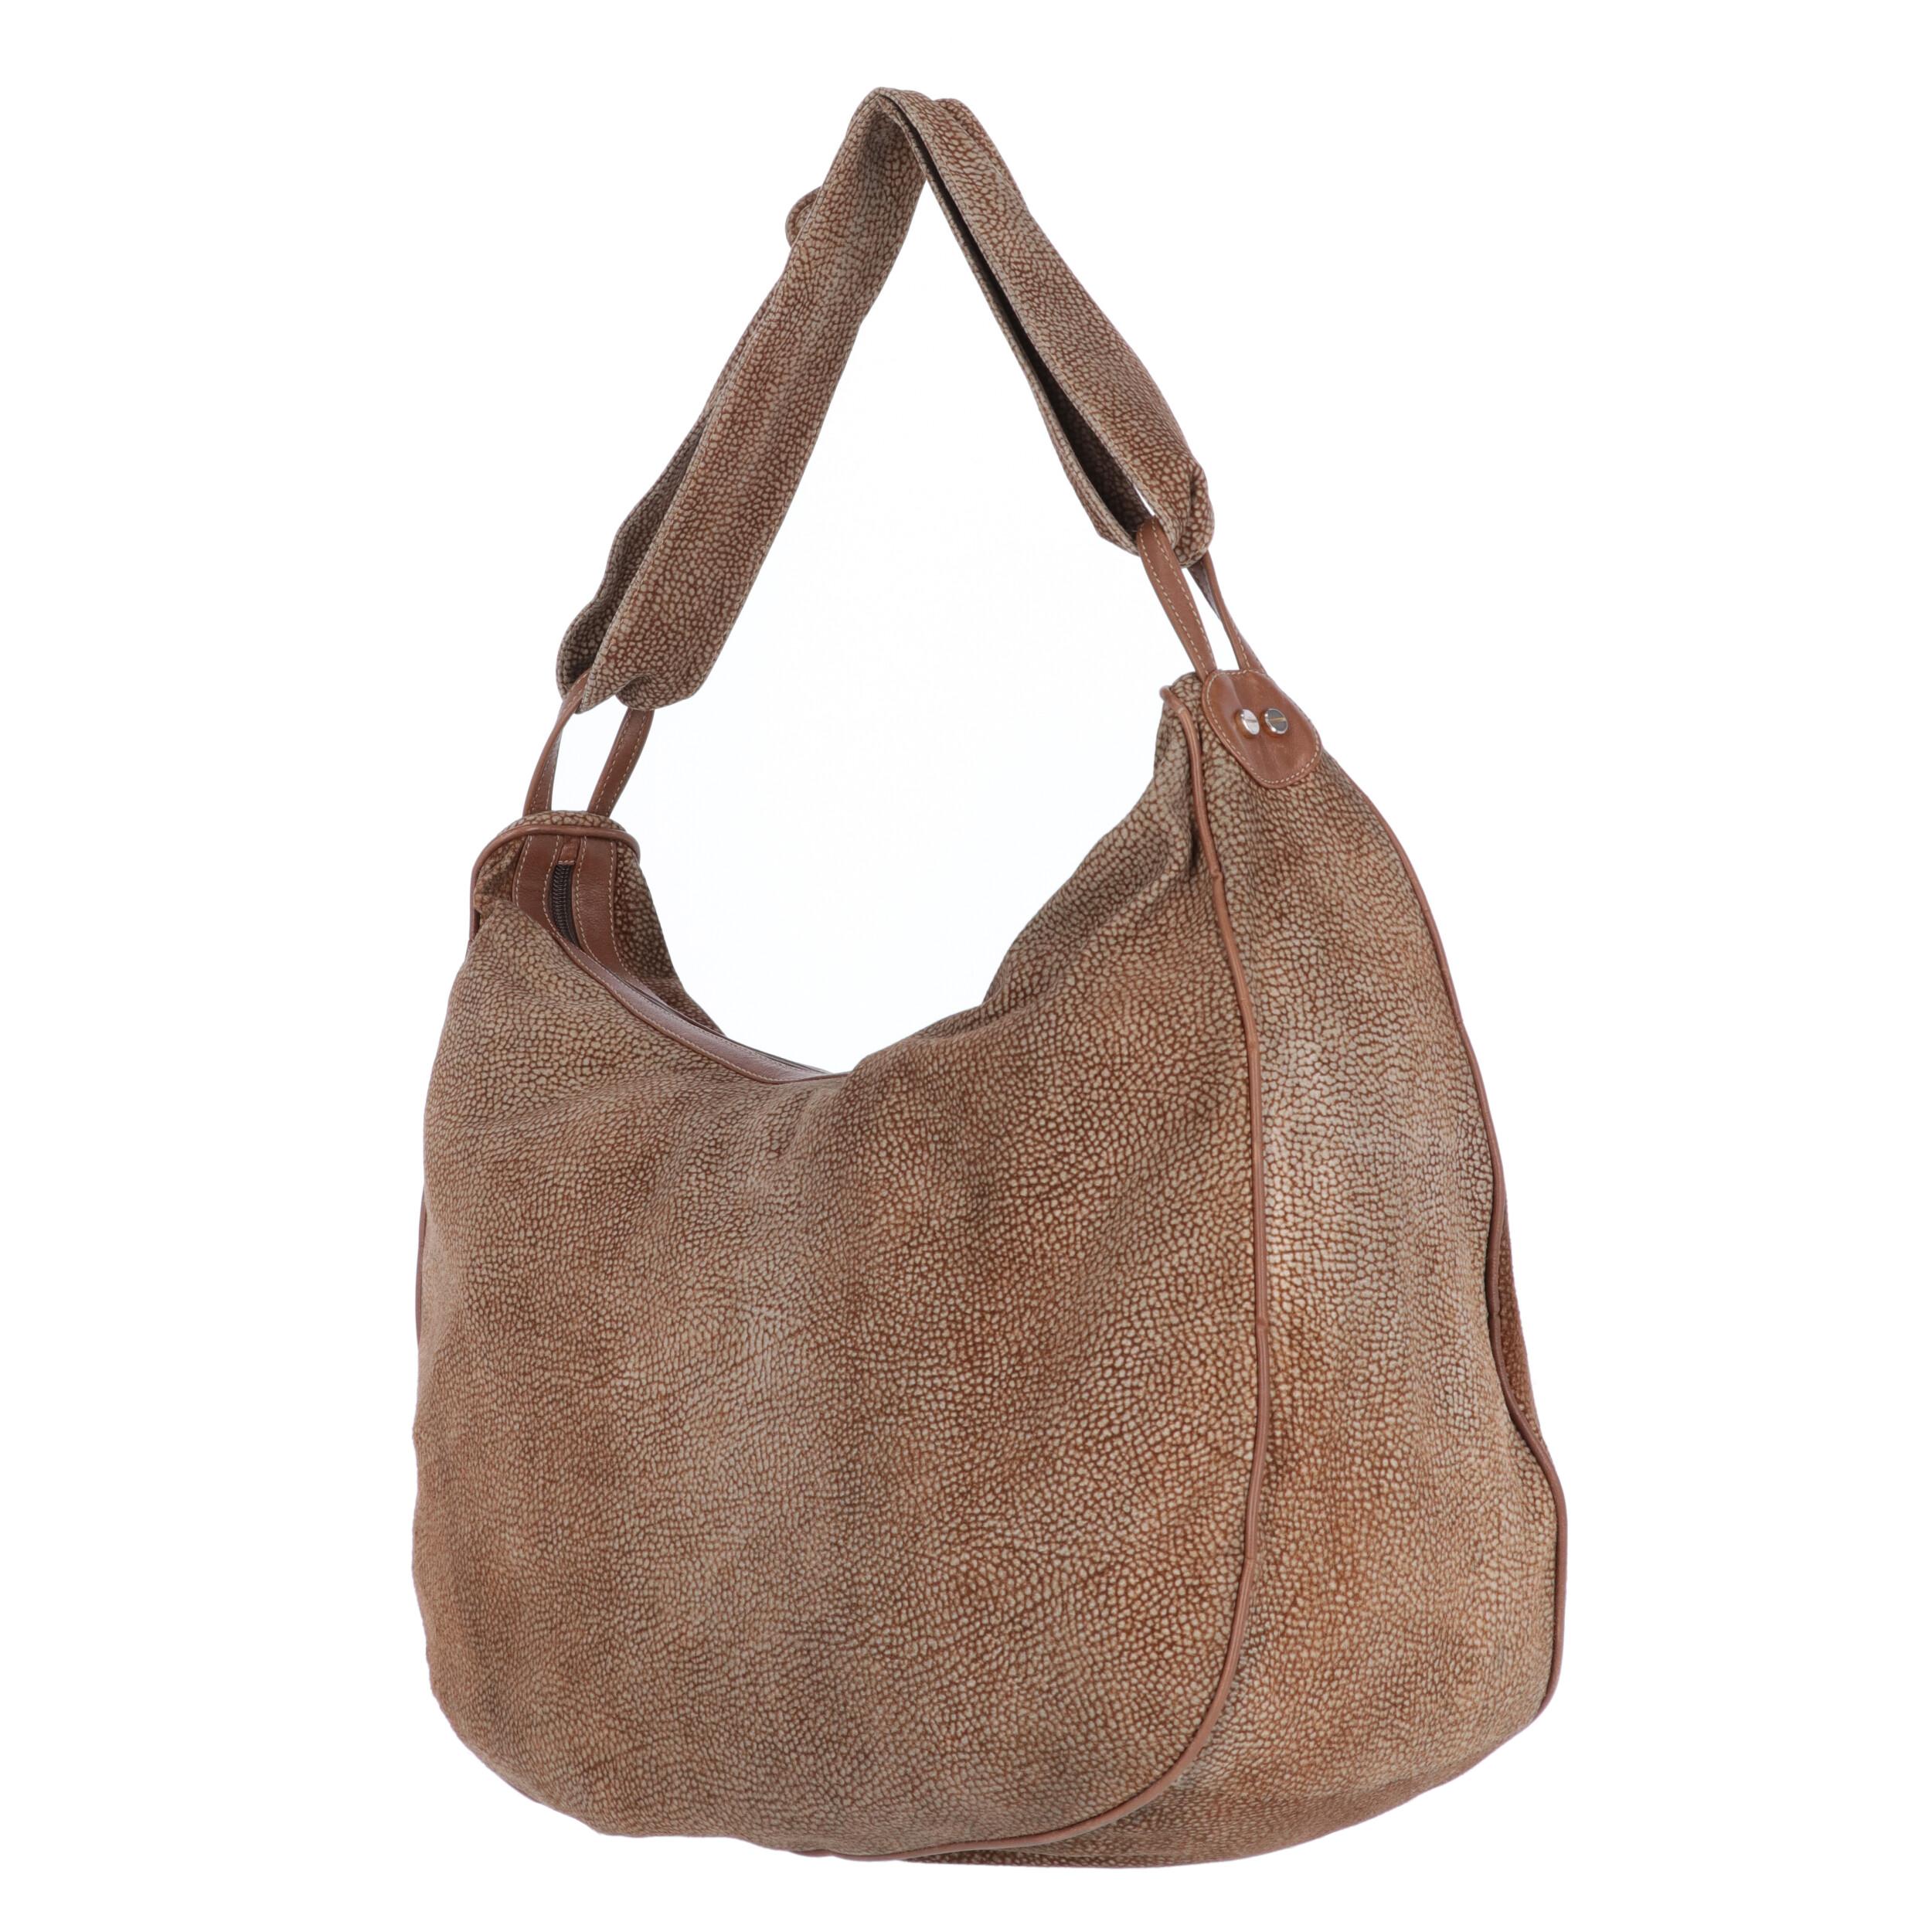 Borbonese beige and brown op print suede tote bag with brown leather details. Zip closure and suede shoulder strap with decorative knot.

The bag shows light signs of wear on the suede, as shown in the pictures.

Years: 1990s
Made in Italy

Width: